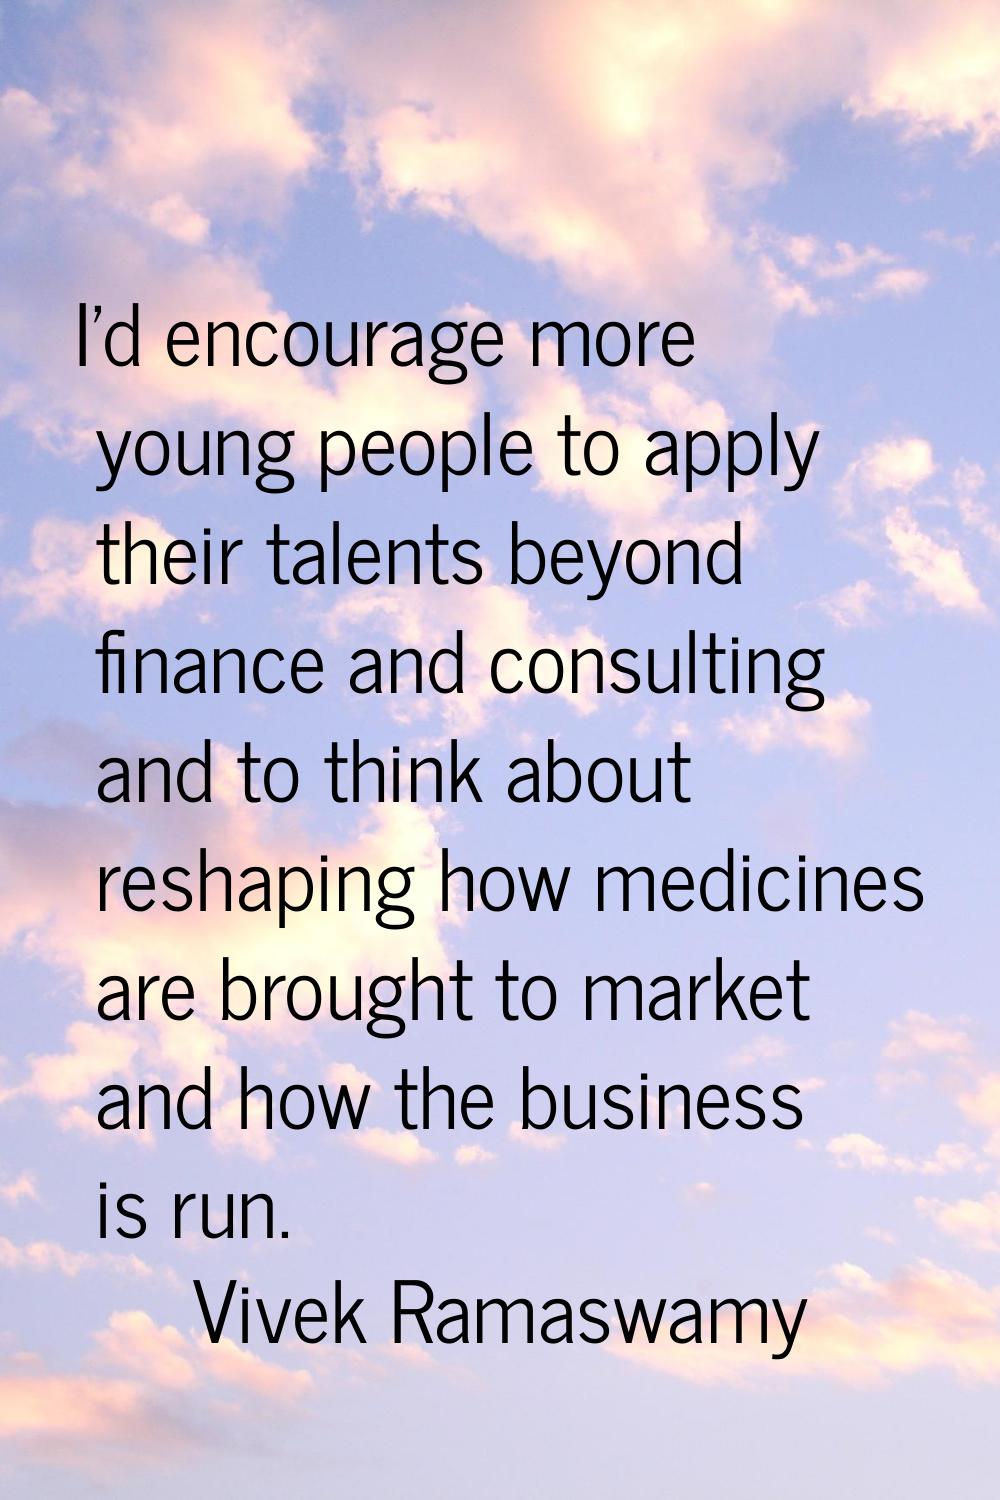 I'd encourage more young people to apply their talents beyond finance and consulting and to think a